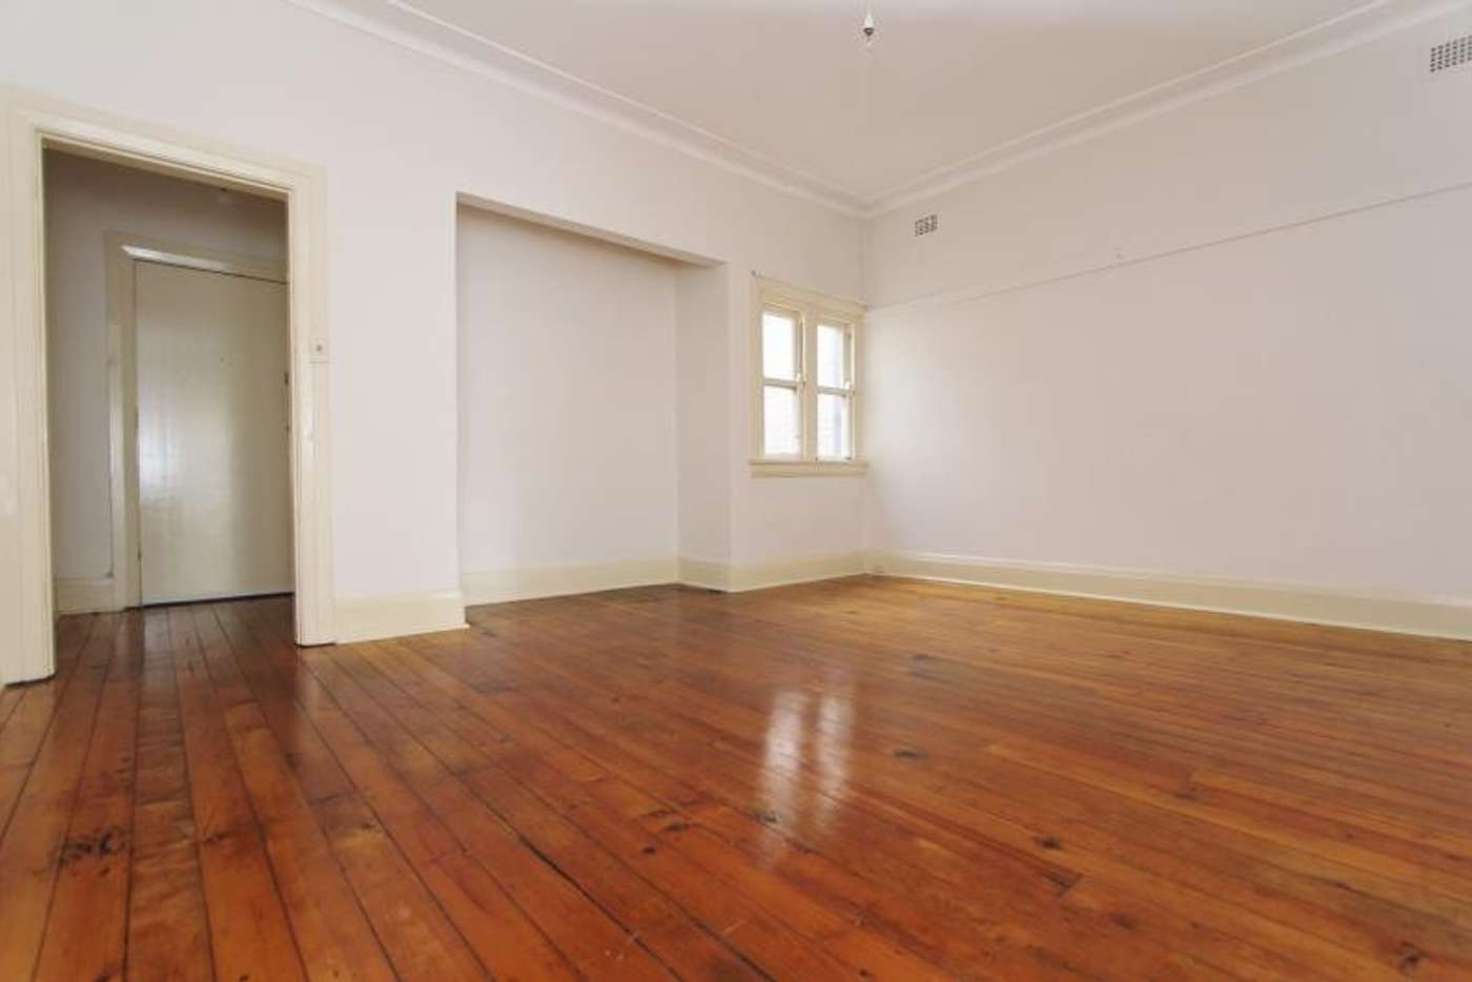 Main view of Homely apartment listing, 2/141 Curlewis St, Bondi Beach NSW 2026